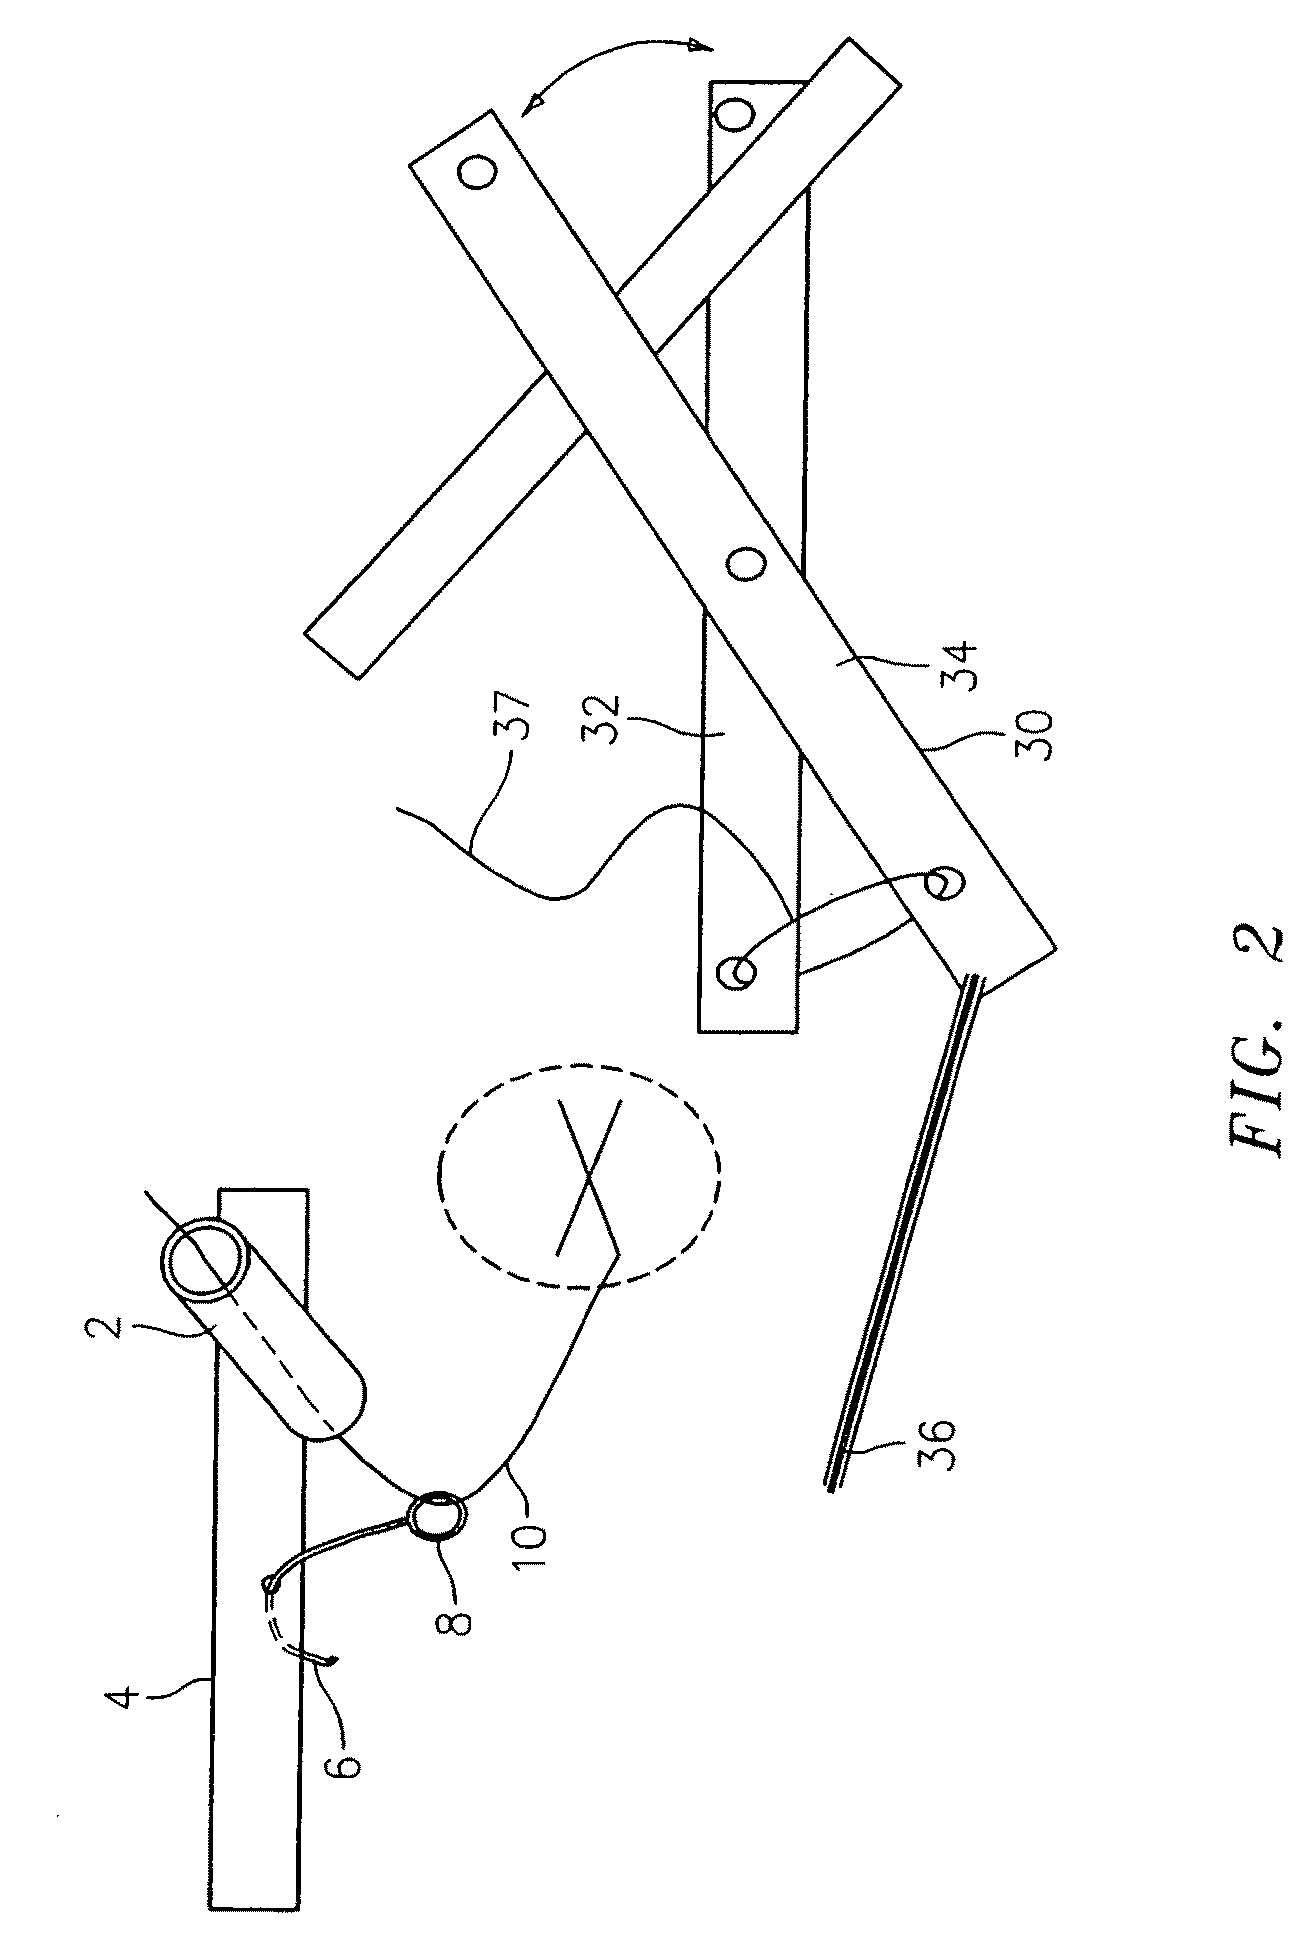 Suspension/retraction device for surgical manipulation